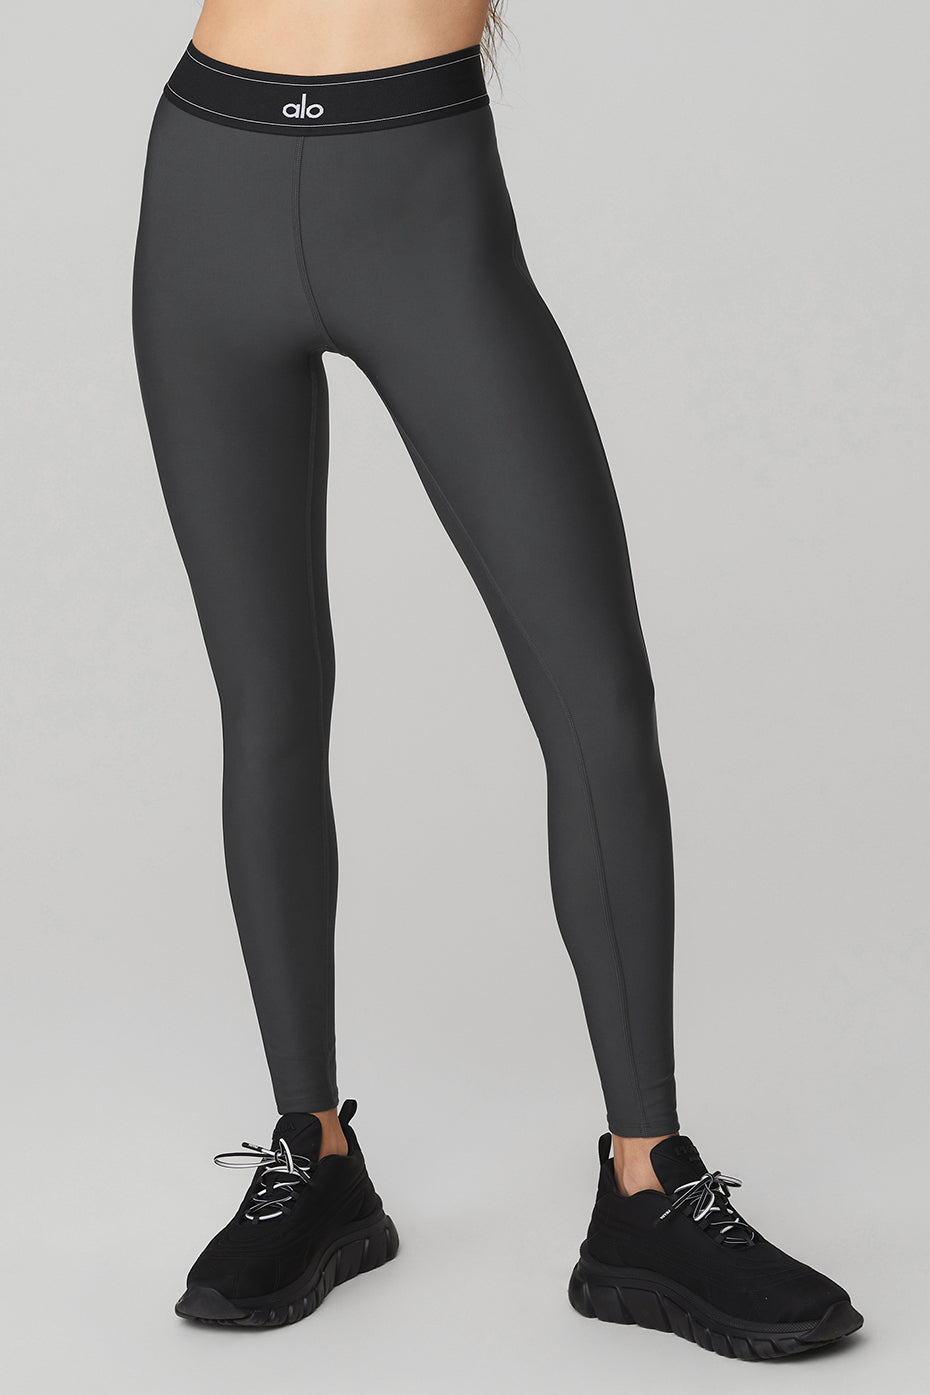 Gray Warm Airlift Leggings by Alo on Sale